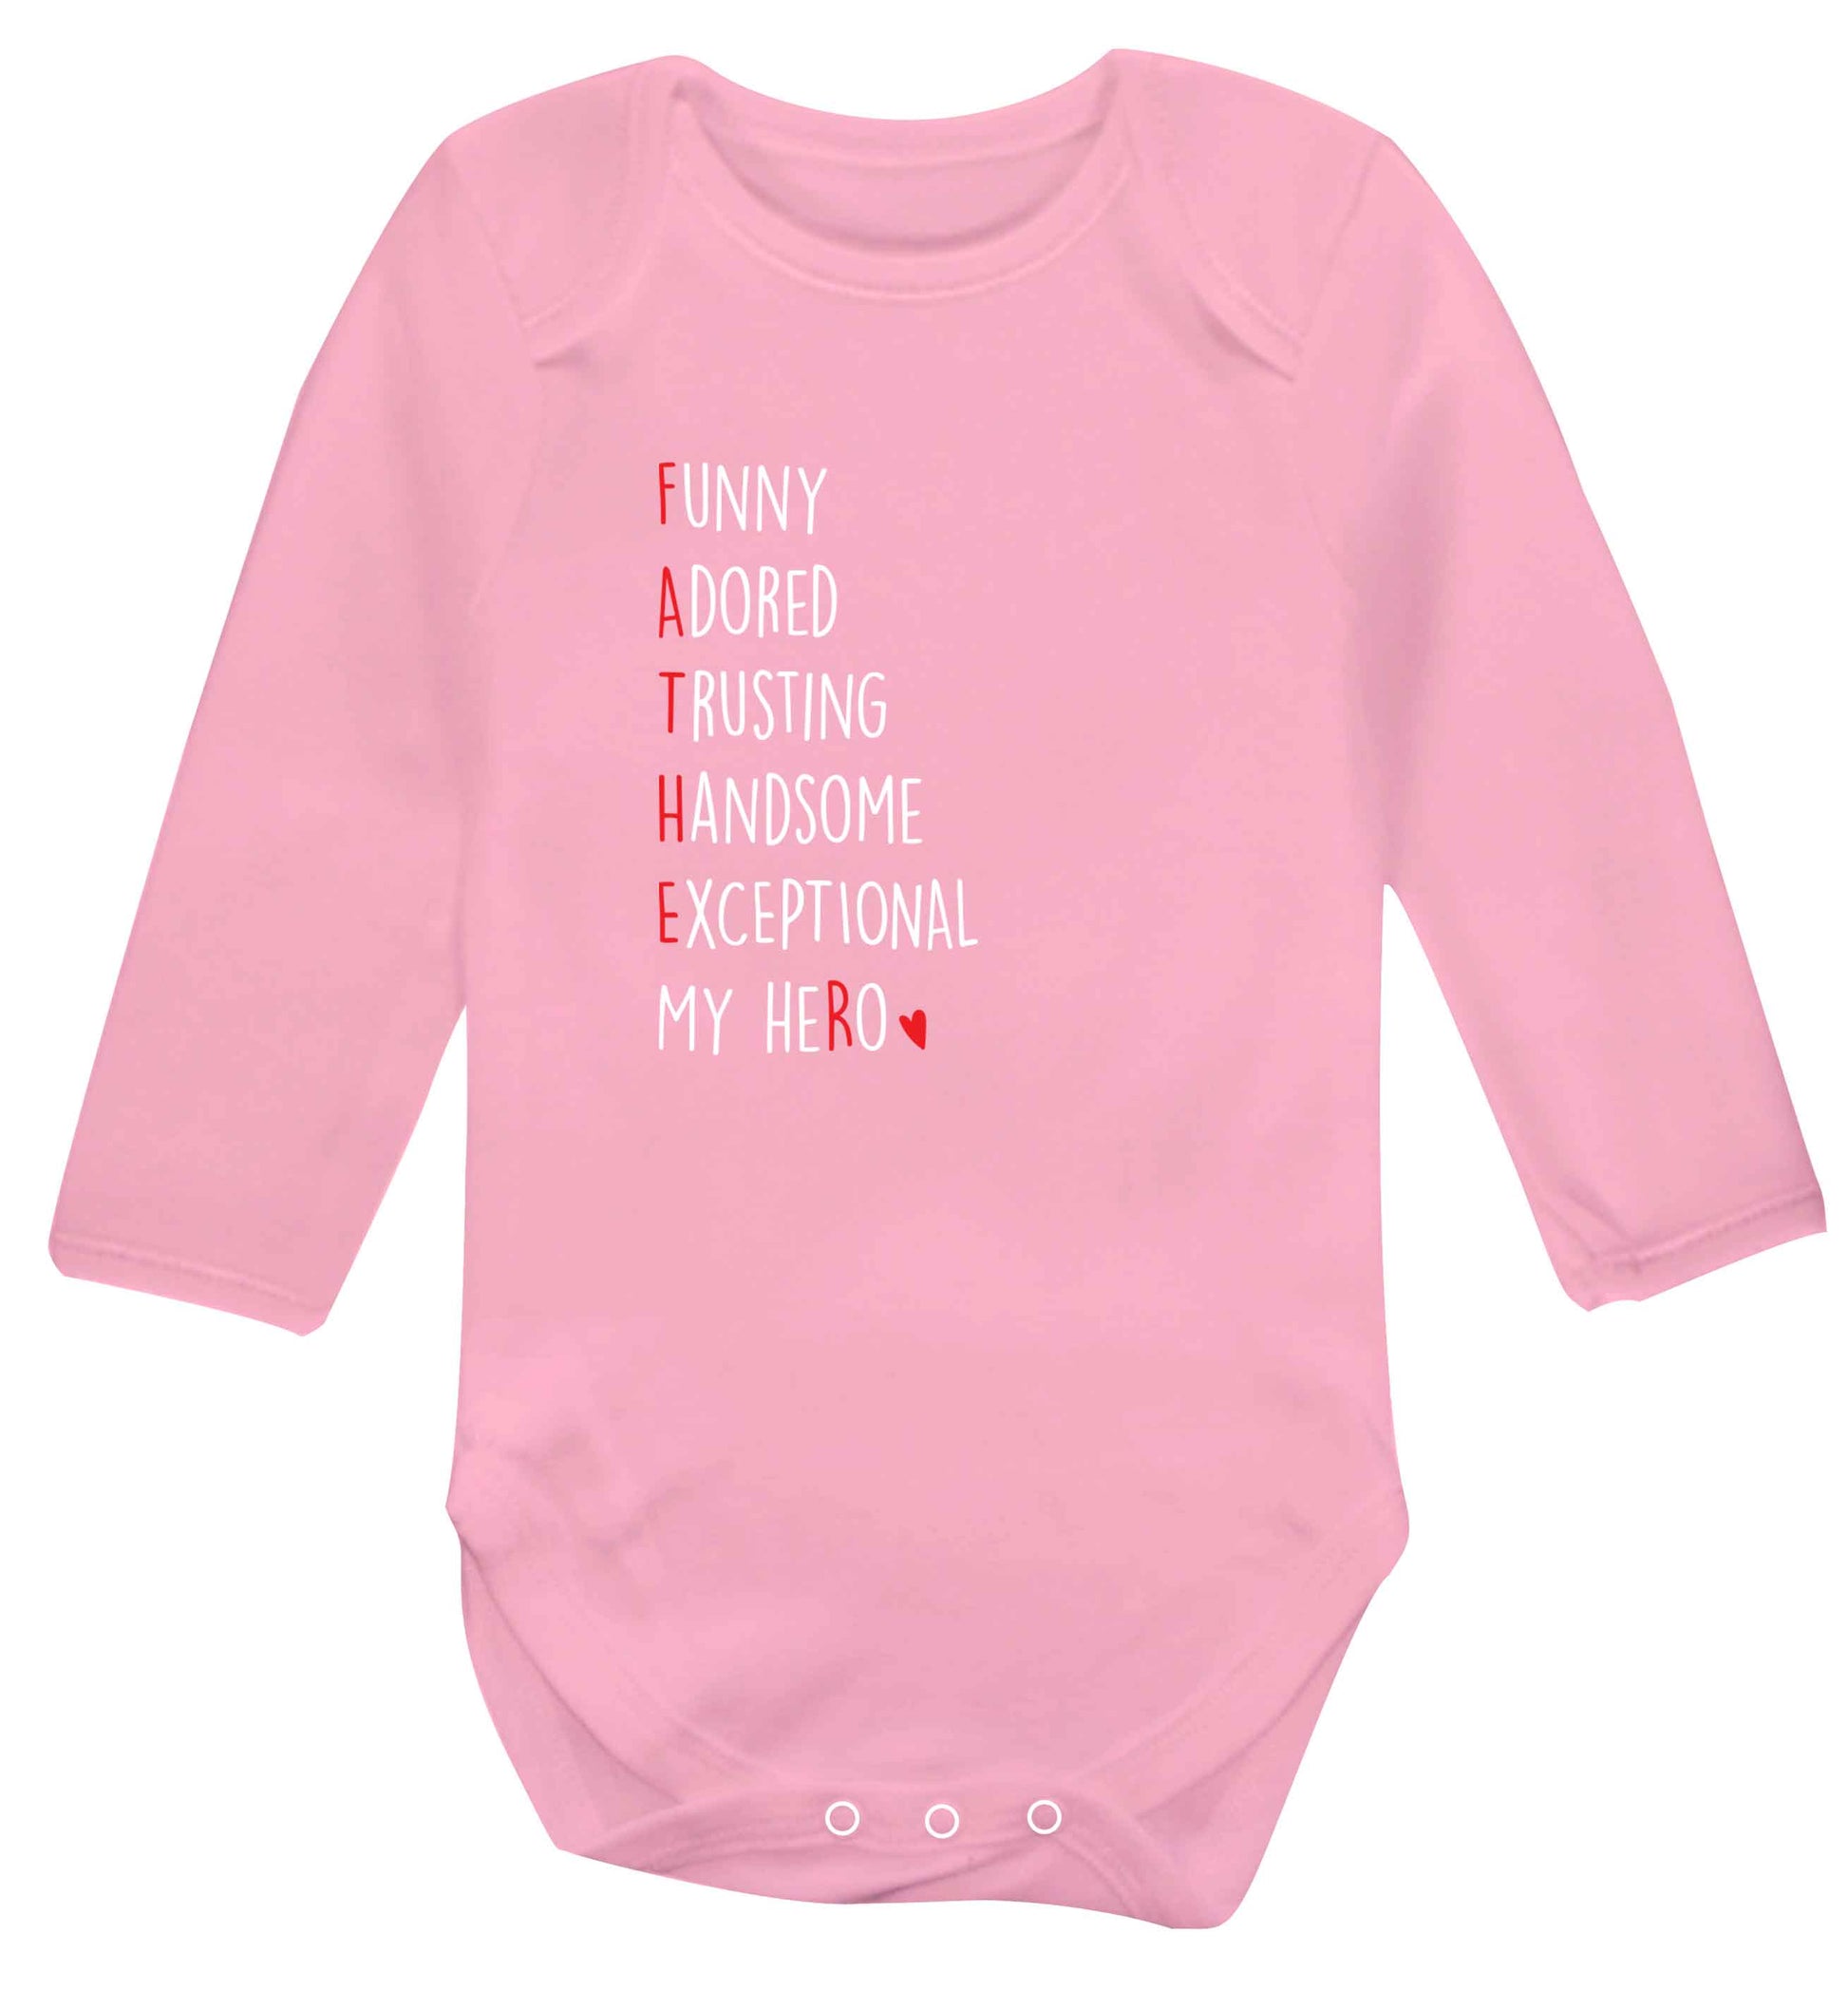 Father, funny adored trusting handsome exceptional my hero baby vest long sleeved pale pink 6-12 months